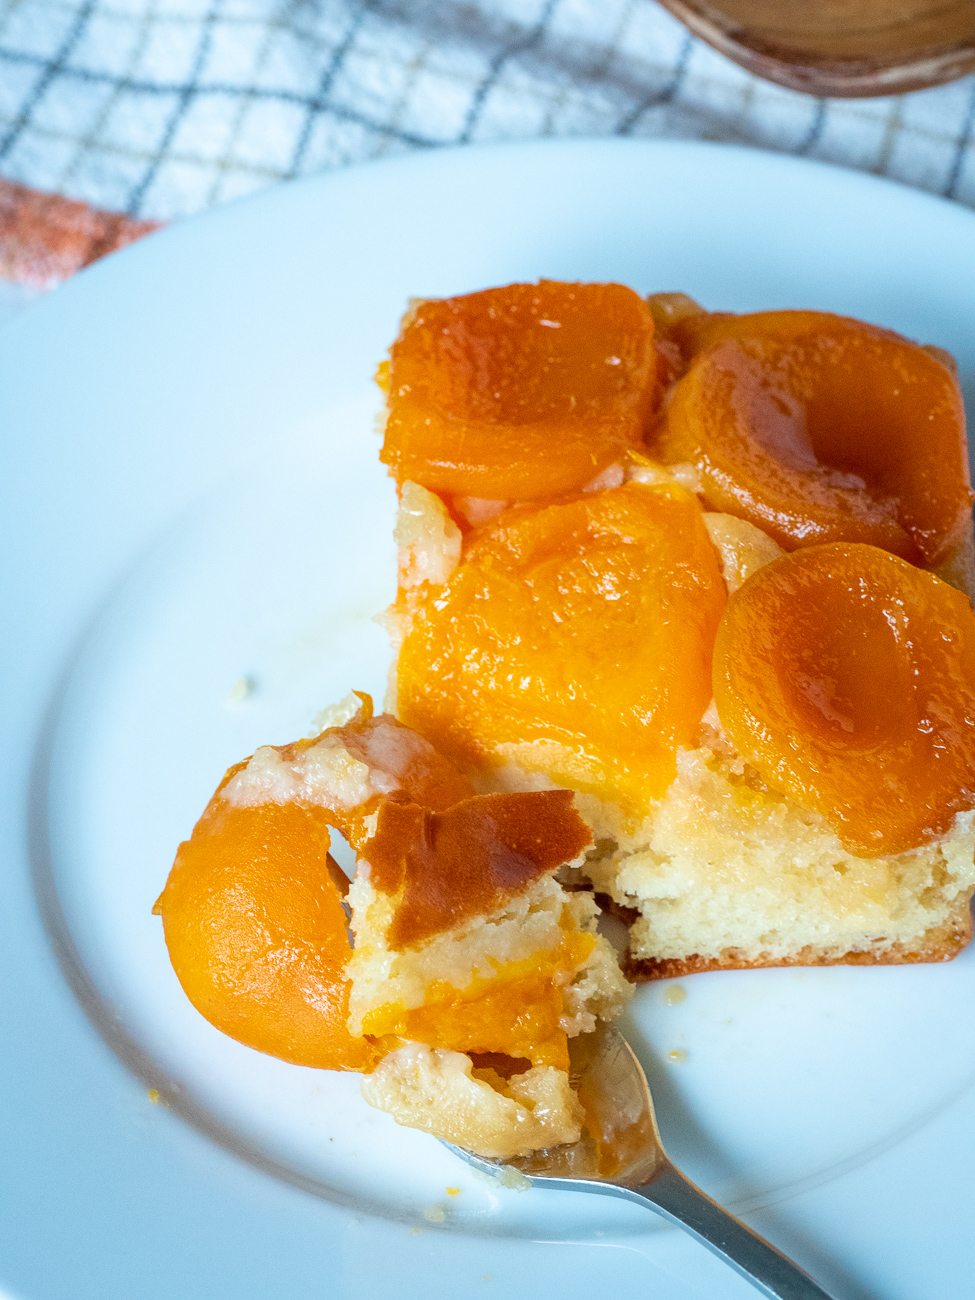 Peach and Apricot Moelleux Cake - French dessert recipe